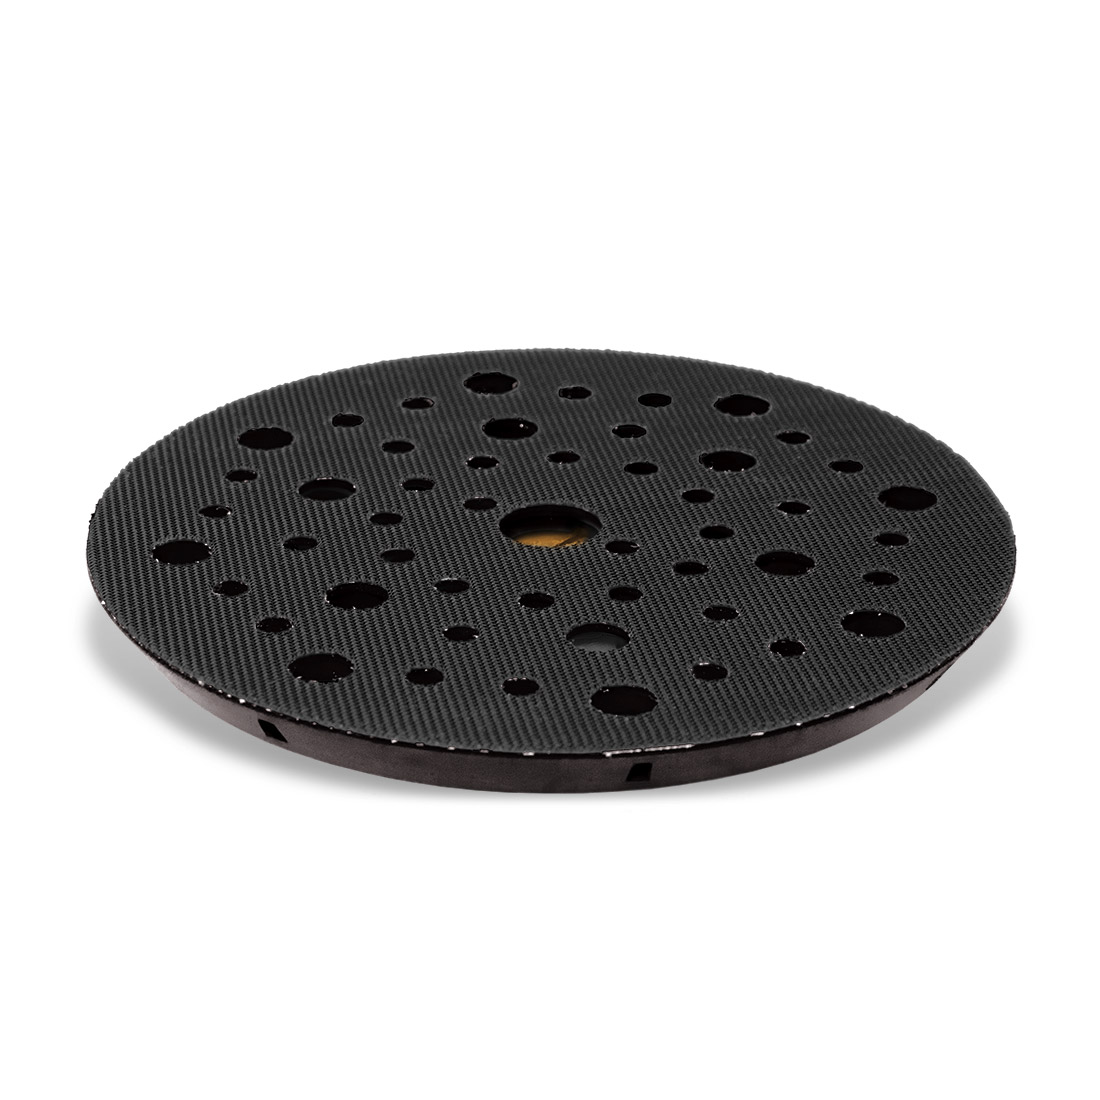 Multi-hole driving disc soft